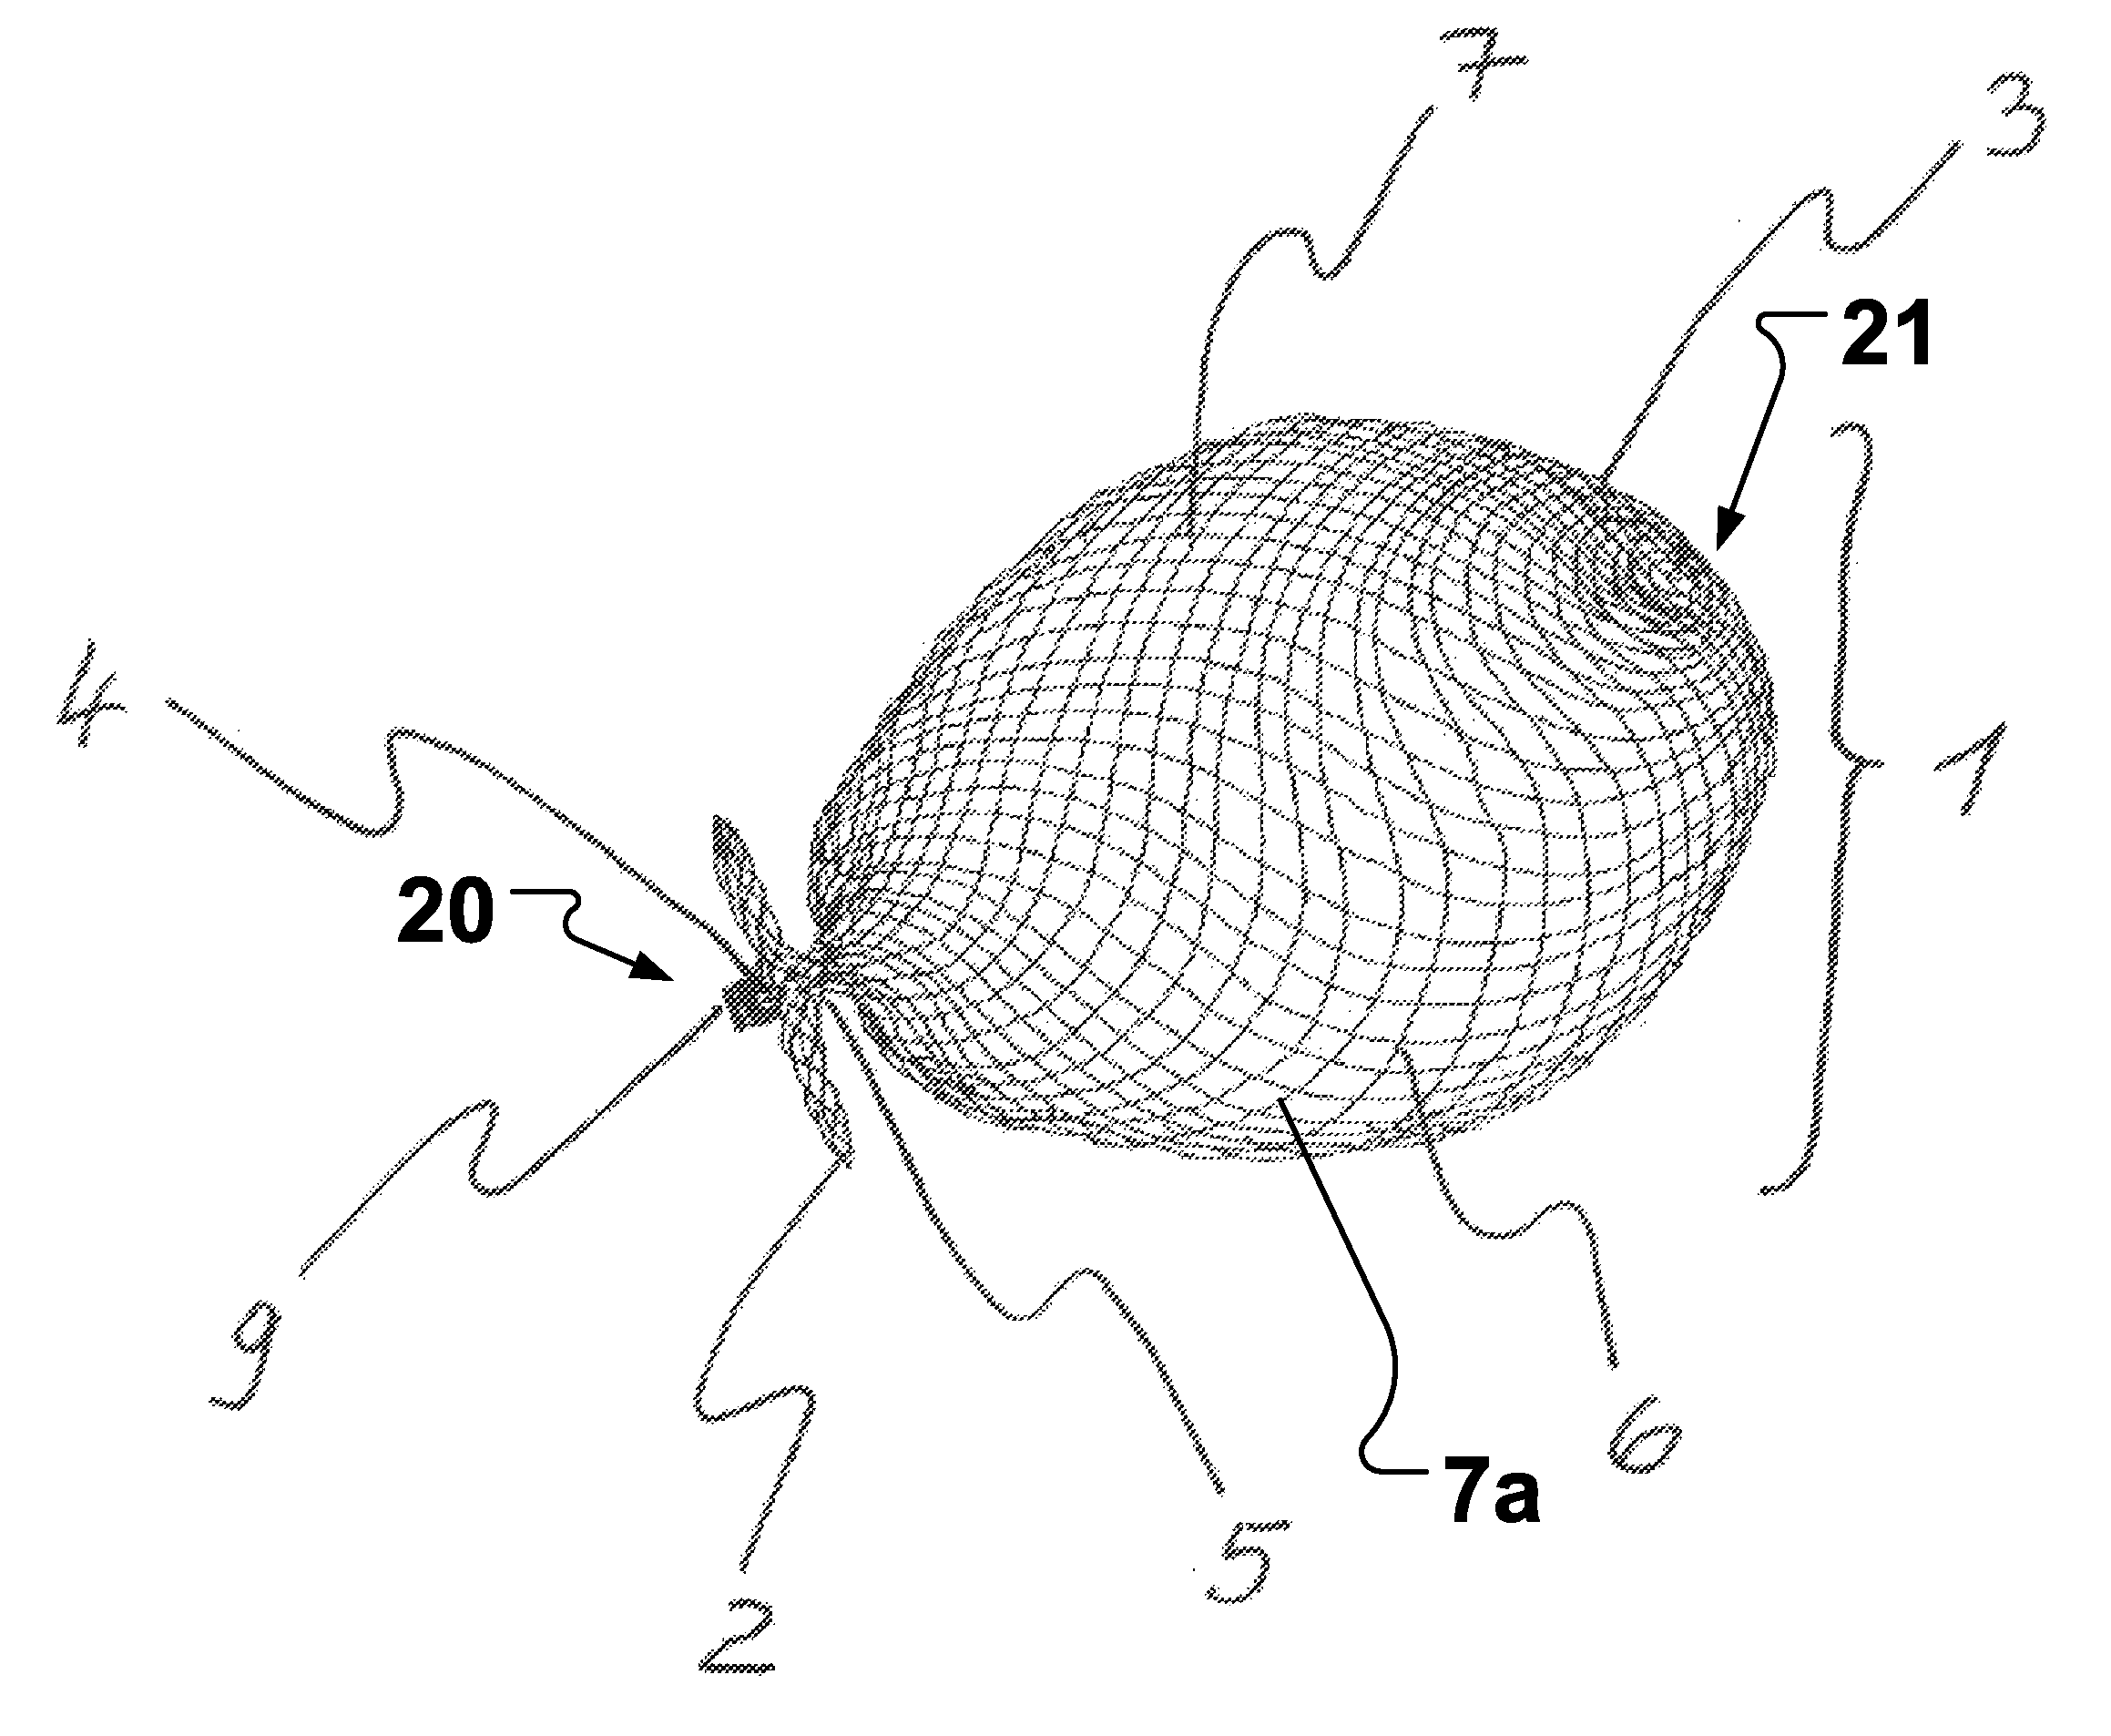 Occluder for occluding an atrial appendage and production process therefor